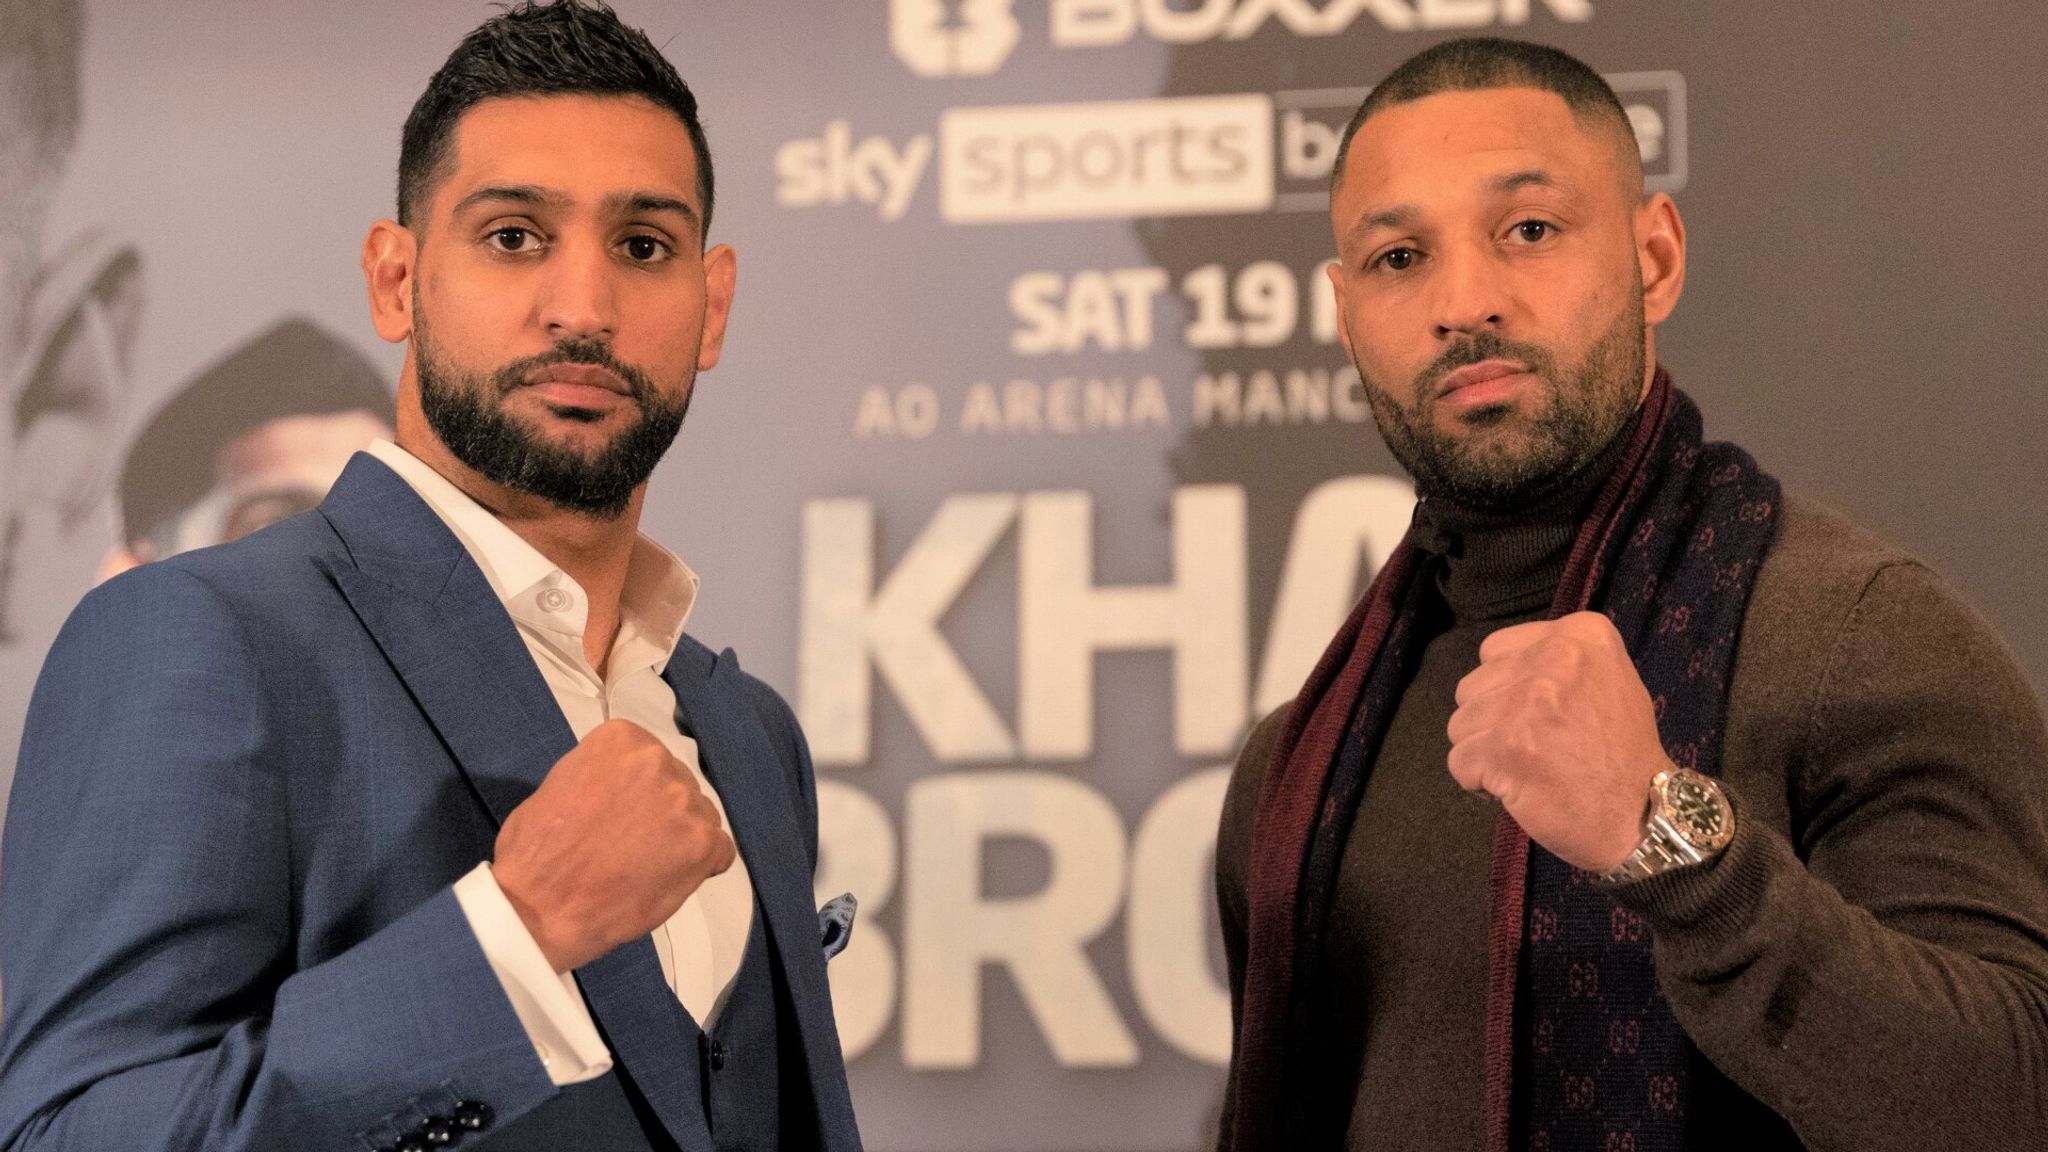 Kell Brook has confirmed a &#39;rematch clause&#39; in the agreement for his grudge fight with Amir Khan | Boxing News | Sky Sports